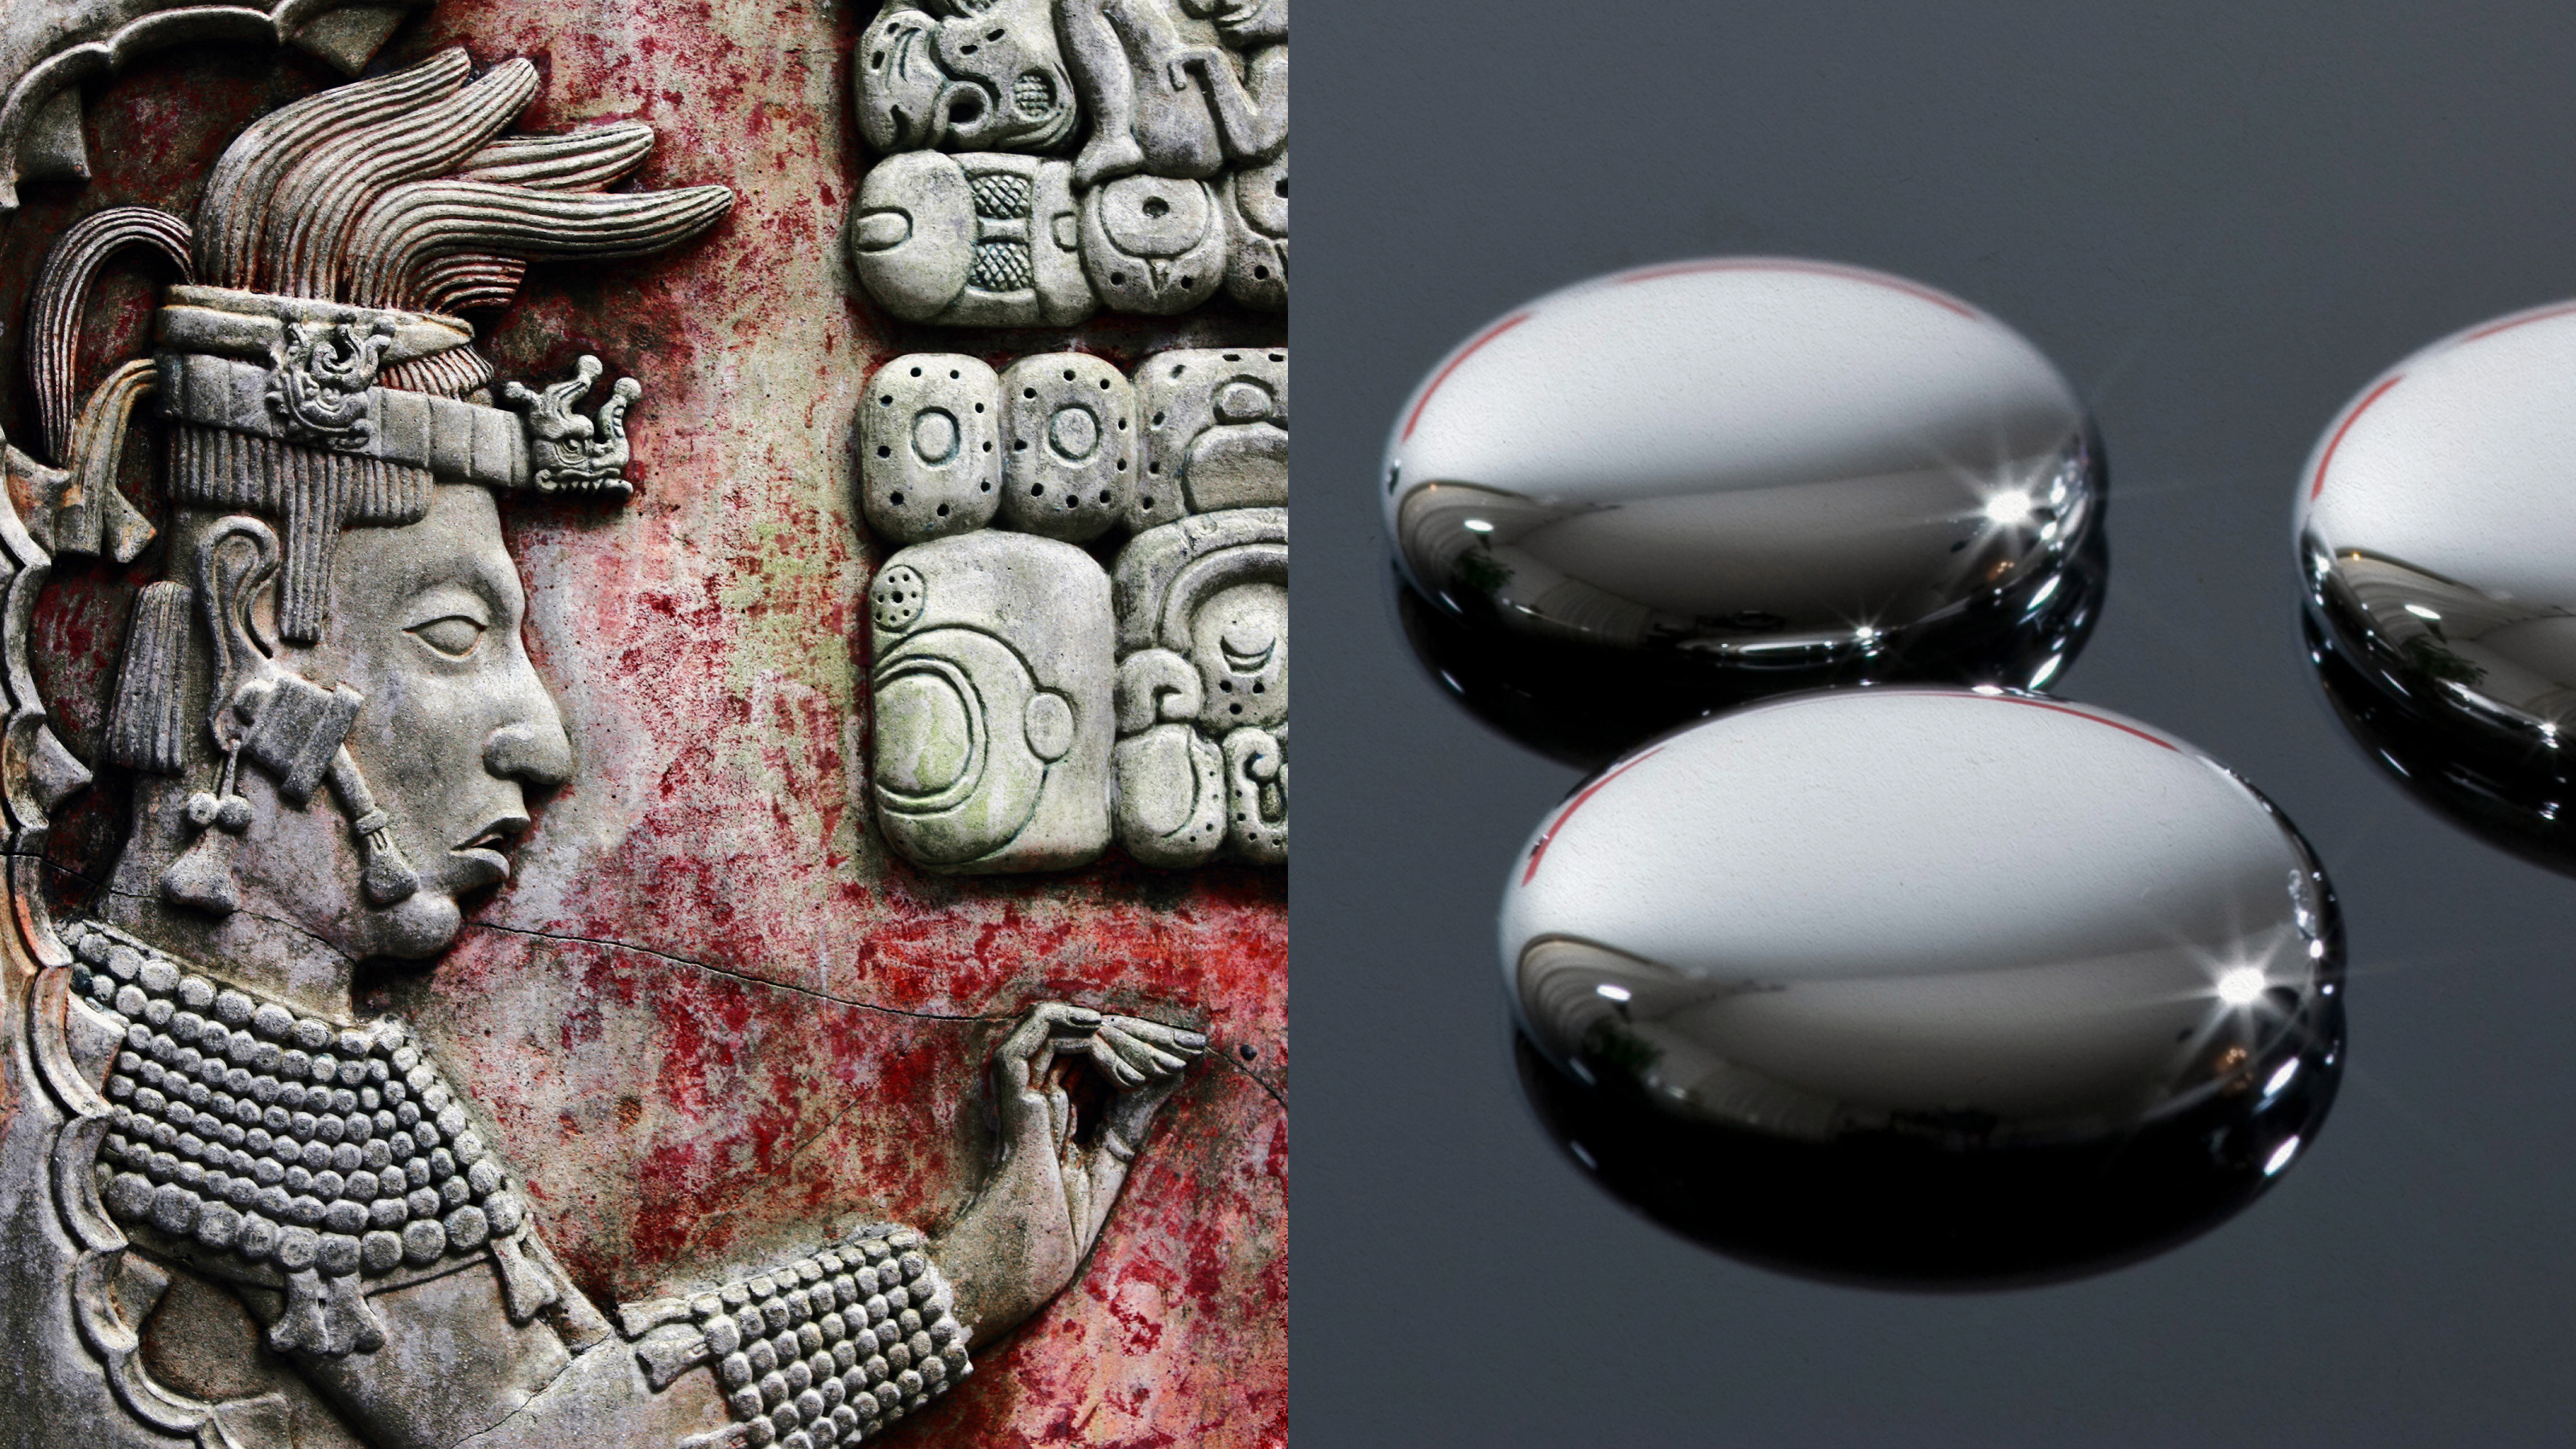 A group of silver balls resembling mercury surrounding a statue of a man influenced by Maya culture.